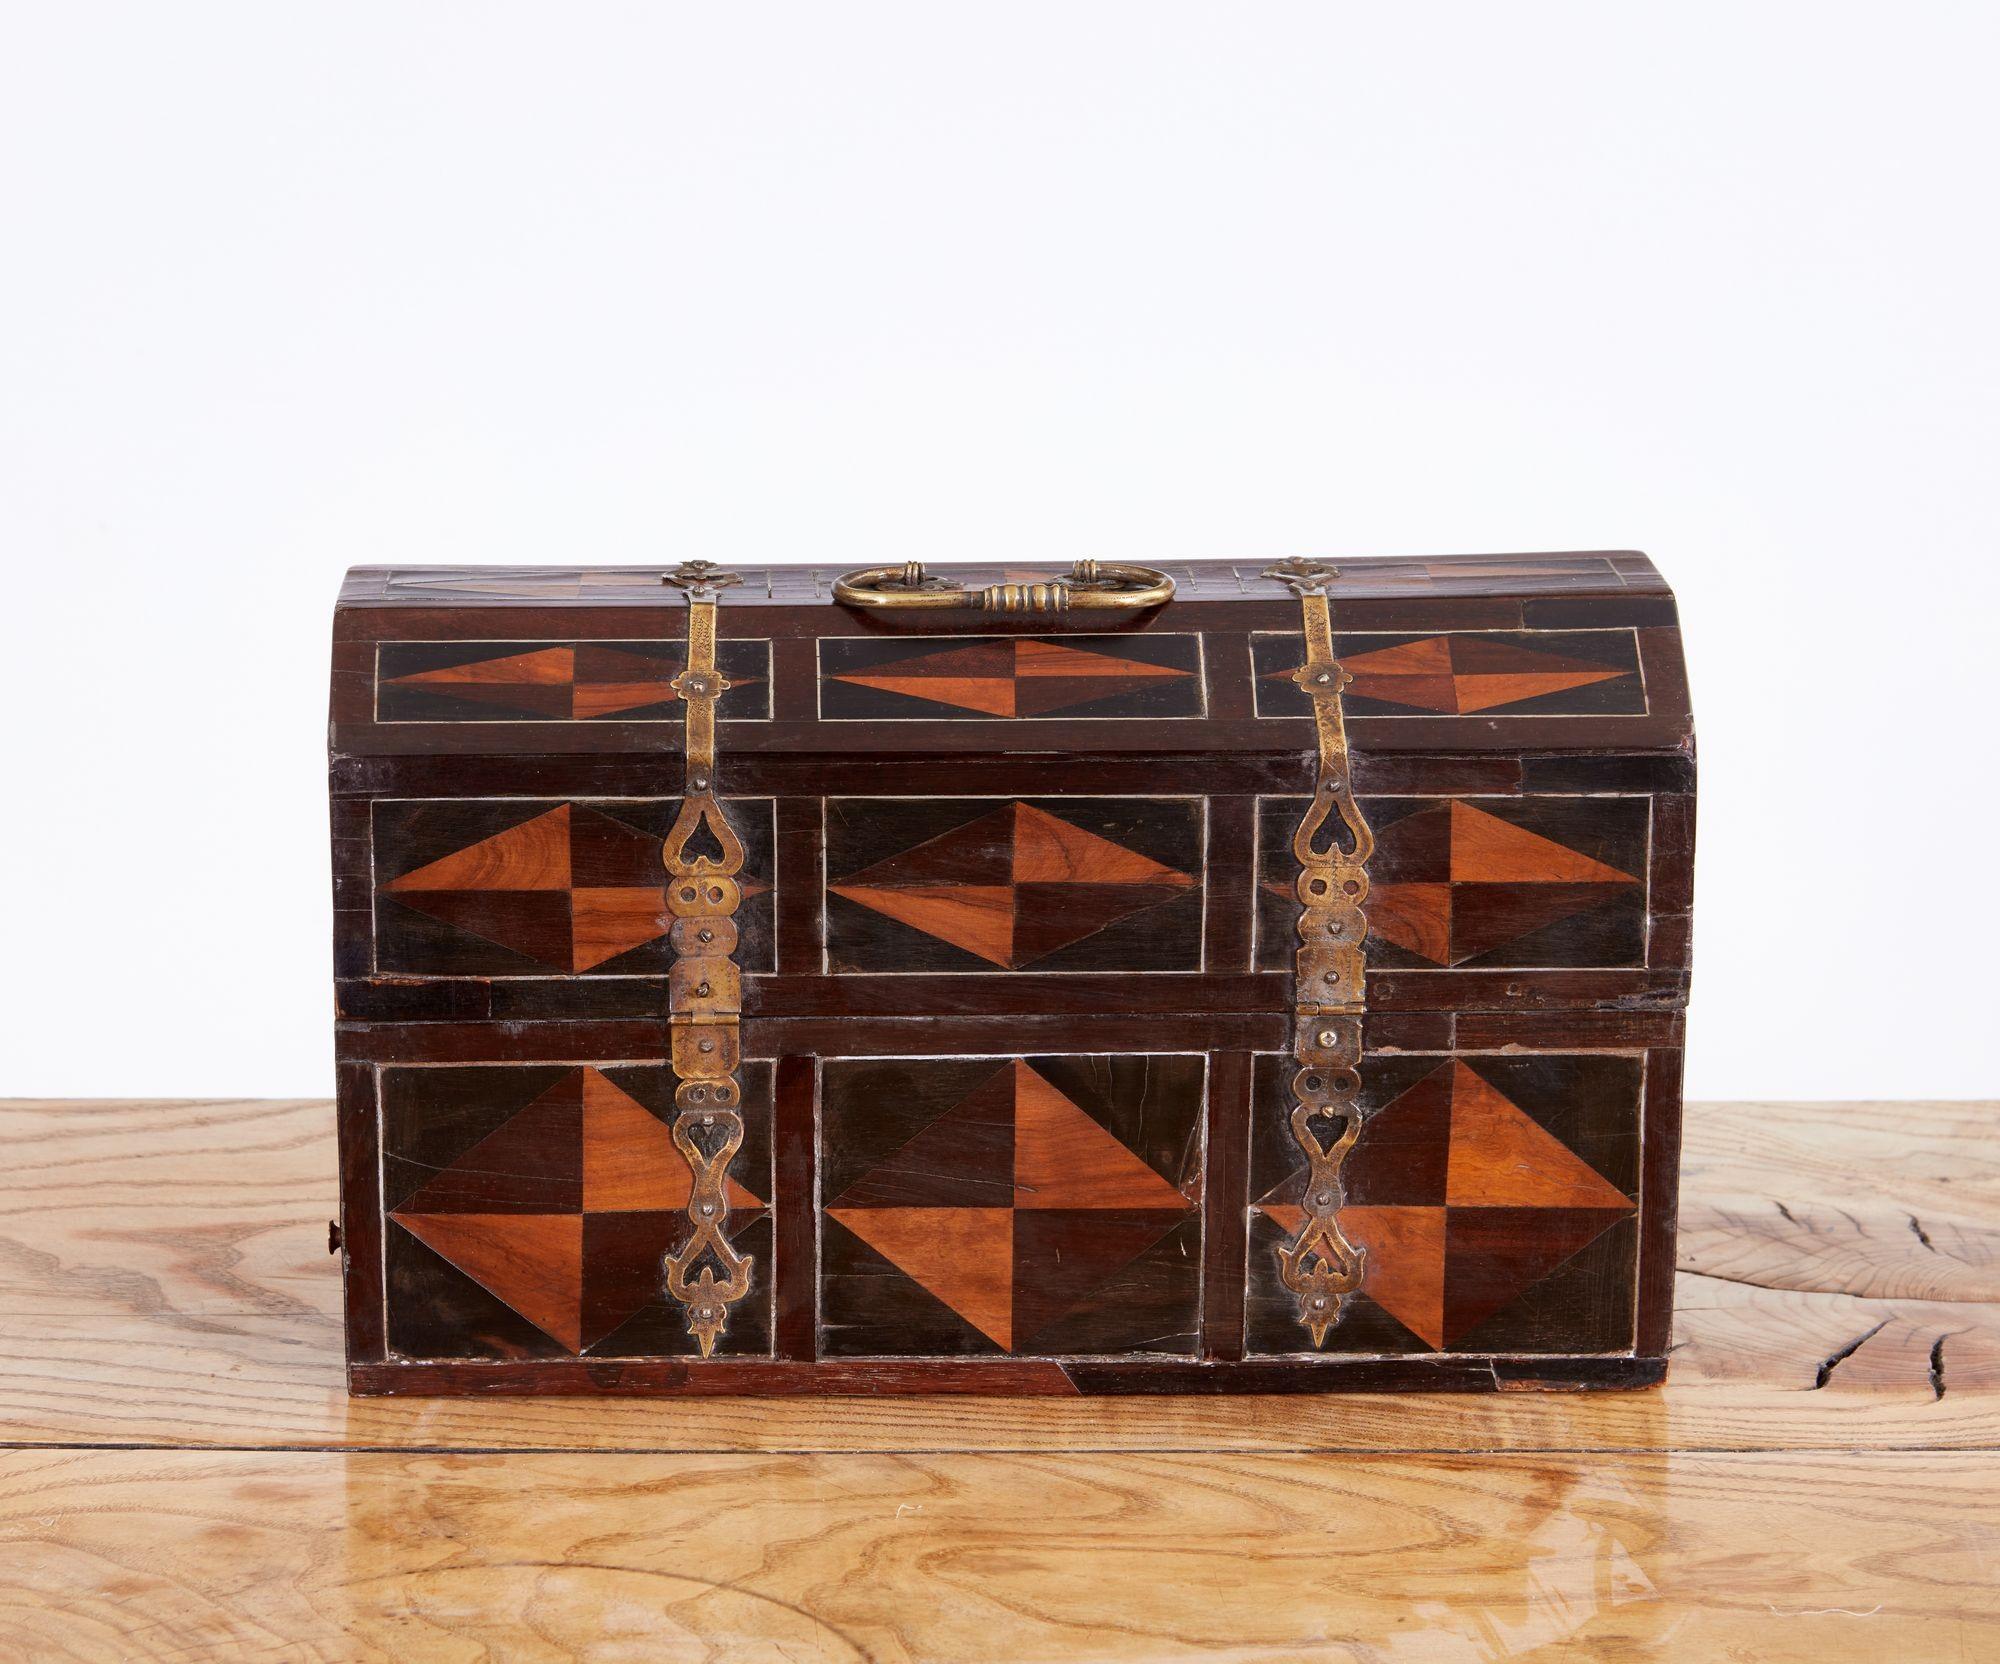 Fine 17th century geometric marquetry inlaid rosewood casket with strapwork hinges, pewter string inlay around ebony and fruitwood panels, the lower portion with long drawer on side, Antwerp circa 1700.